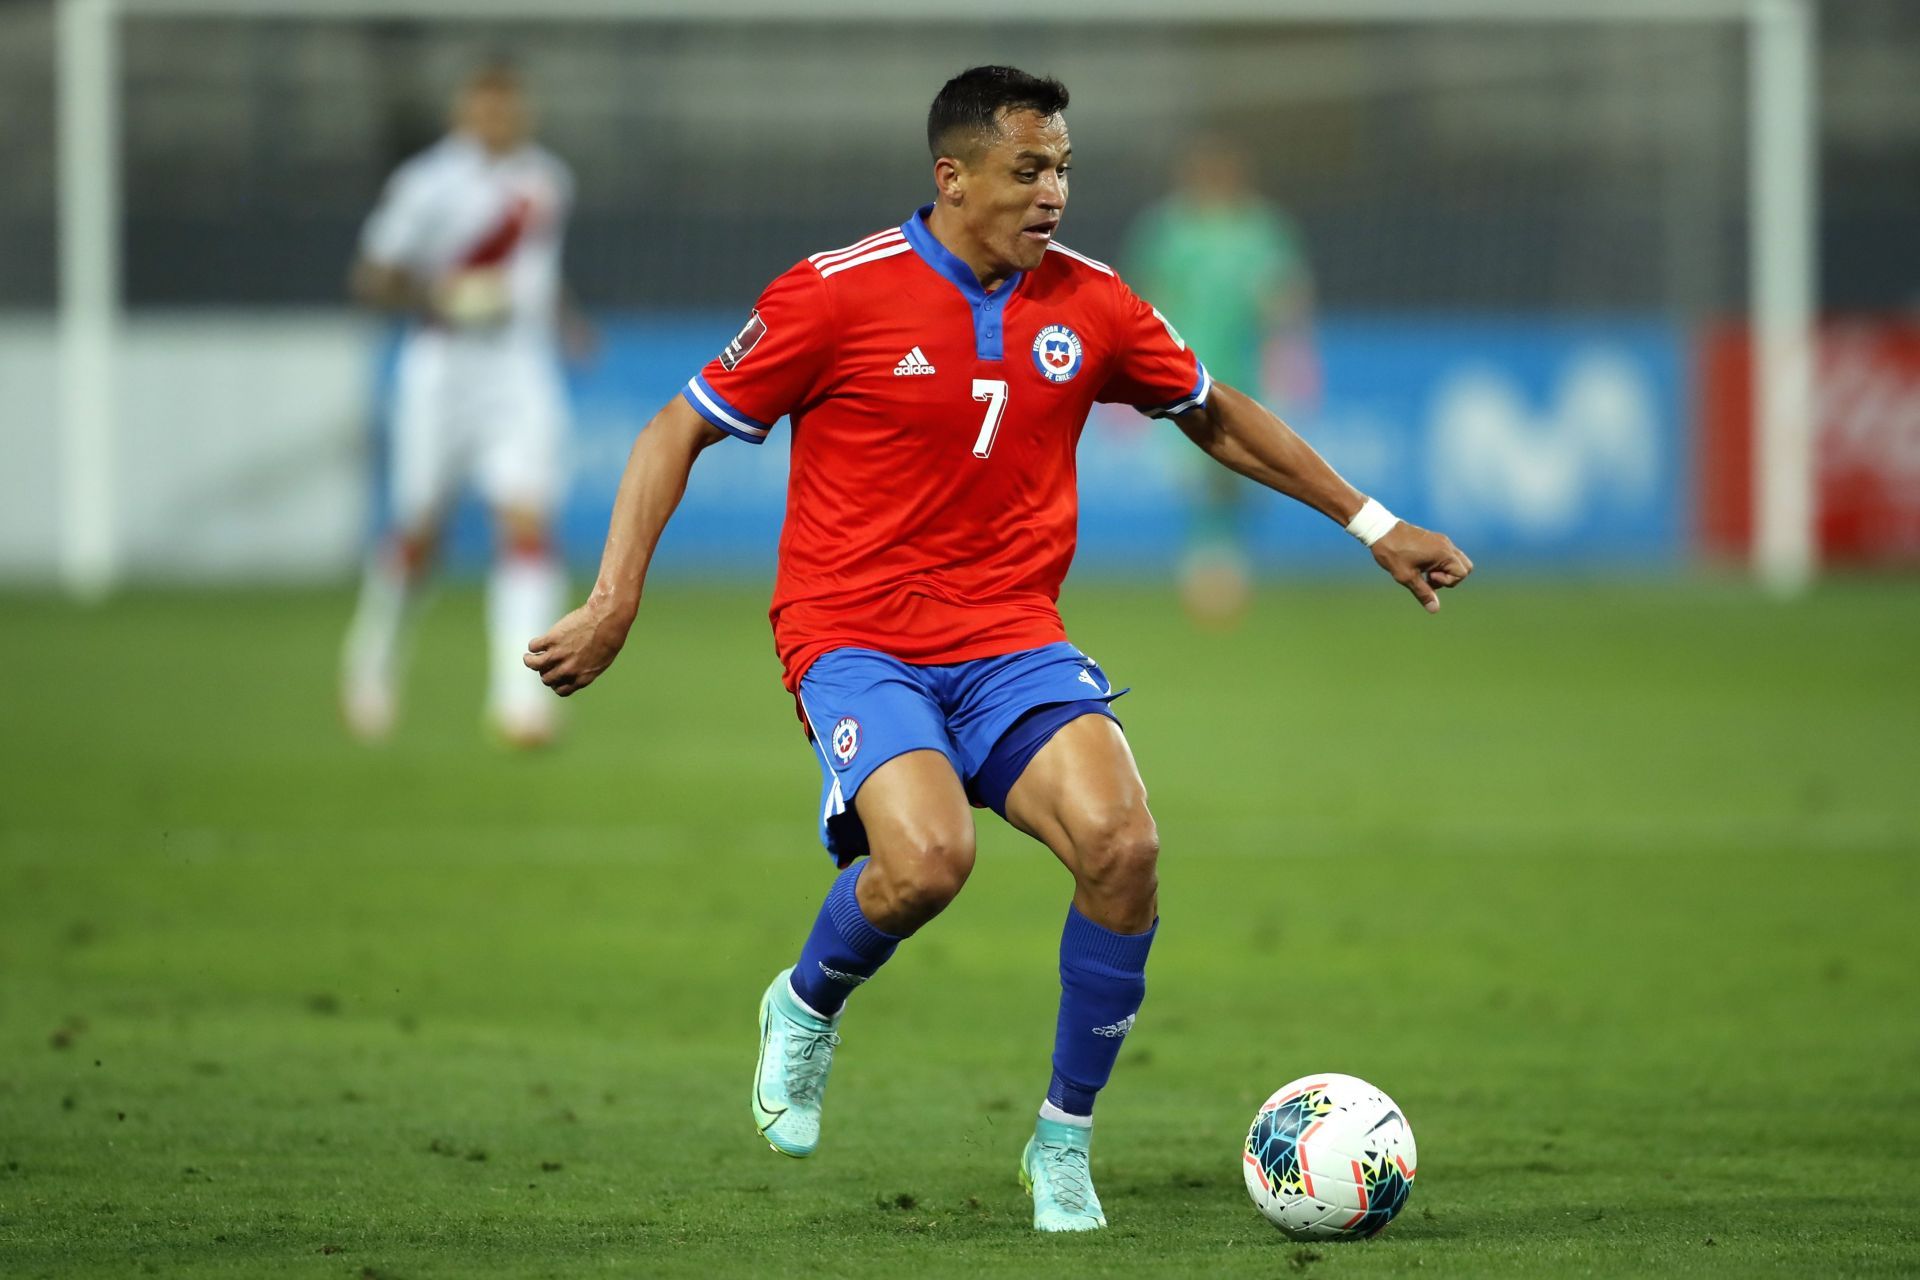 Alexis Sanchez has been a key player for Chile over the years.